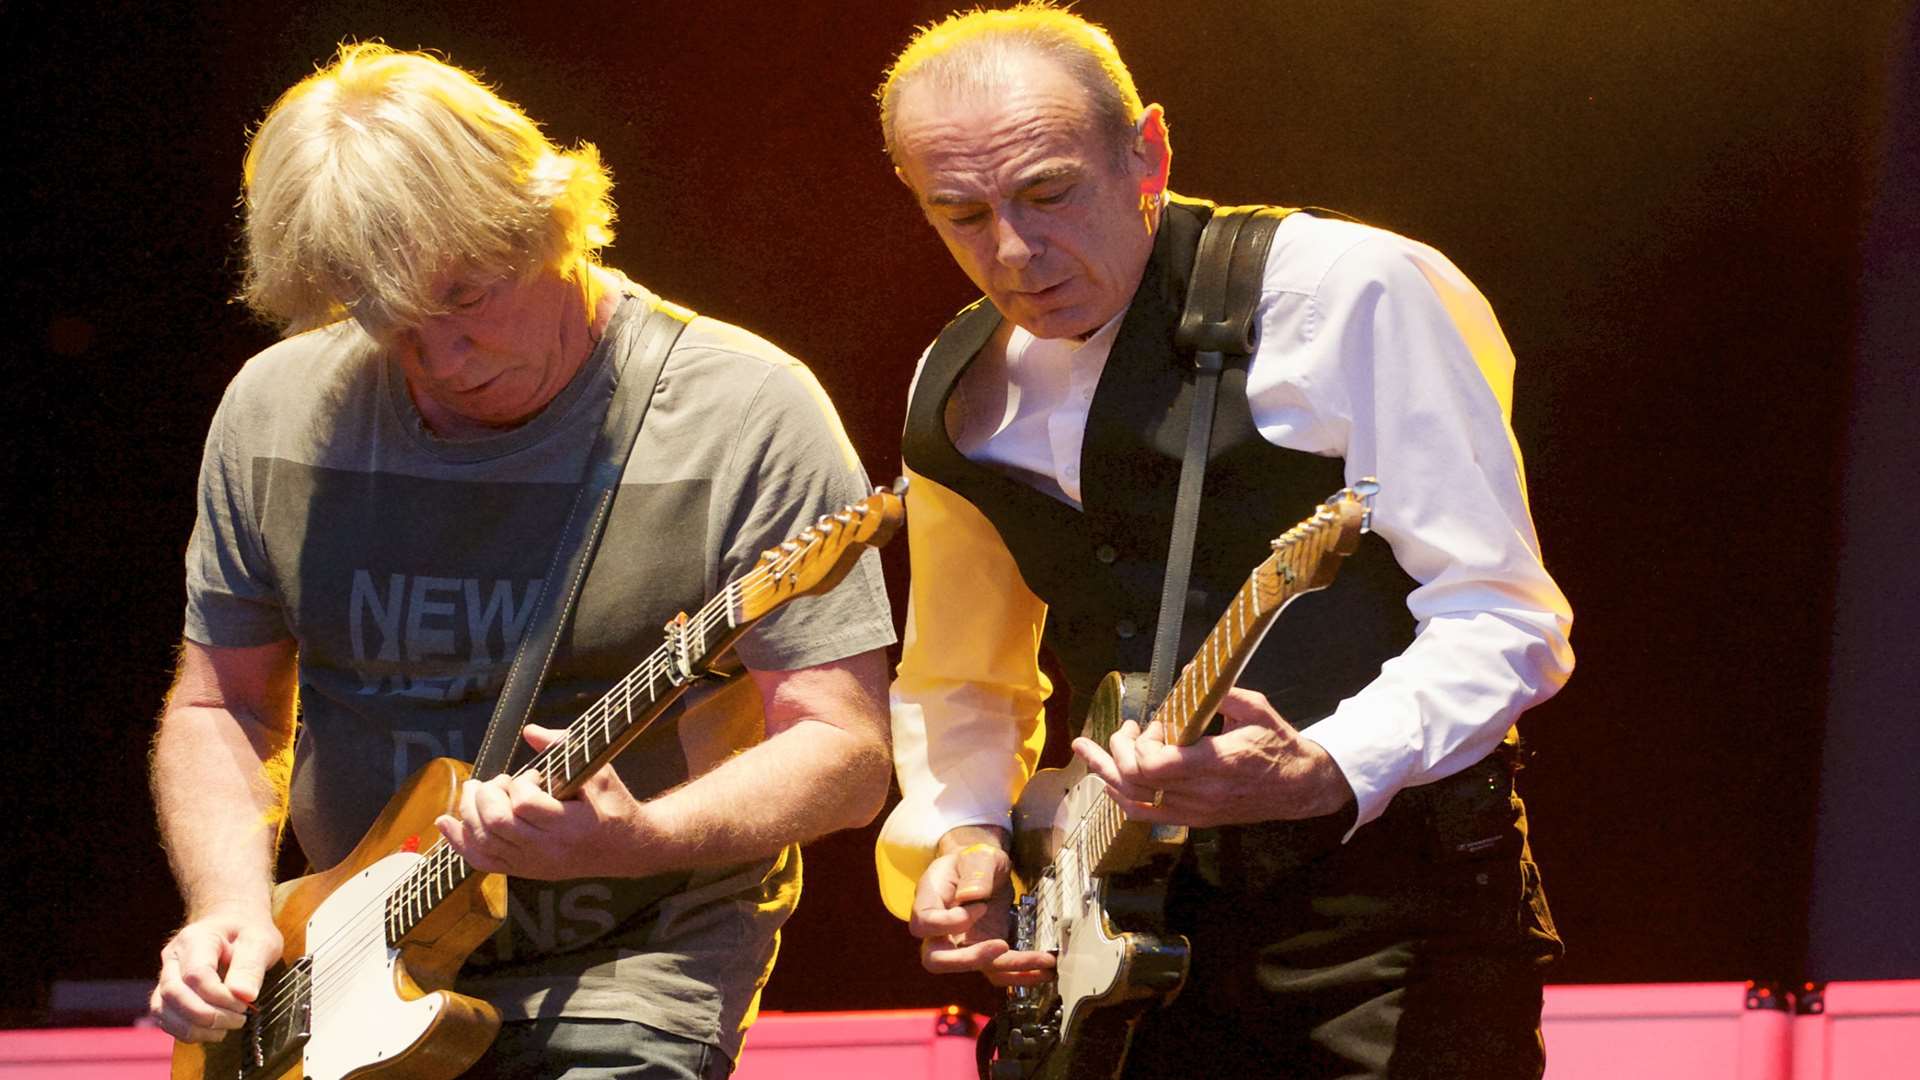 Rick Parfitt and Francis Rossi from Status Quo.